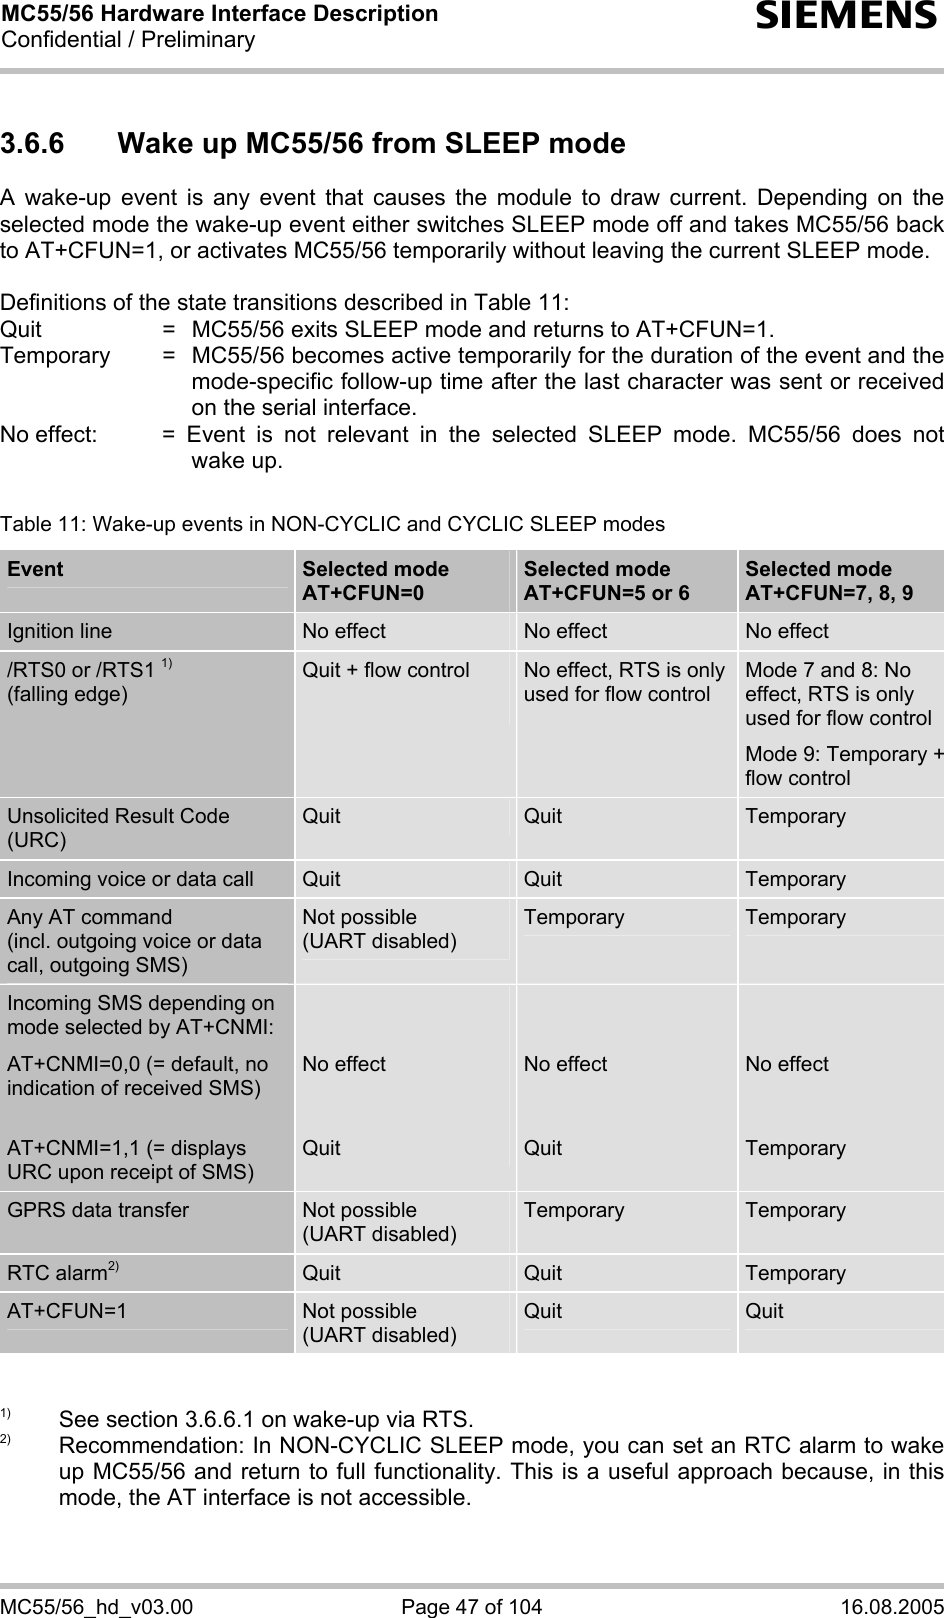 MC55/56 Hardware Interface Description Confidential / Preliminary s MC55/56_hd_v03.00  Page 47 of 104  16.08.2005 3.6.6  Wake up MC55/56 from SLEEP mode A wake-up event is any event that causes the module to draw current. Depending on the selected mode the wake-up event either switches SLEEP mode off and takes MC55/56 back to AT+CFUN=1, or activates MC55/56 temporarily without leaving the current SLEEP mode.  Definitions of the state transitions described in Table 11: Quit  =  MC55/56 exits SLEEP mode and returns to AT+CFUN=1. Temporary  =  MC55/56 becomes active temporarily for the duration of the event and the mode-specific follow-up time after the last character was sent or received on the serial interface. No effect:  = Event is not relevant in the selected SLEEP mode. MC55/56 does not wake up.  Table 11: Wake-up events in NON-CYCLIC and CYCLIC SLEEP modes Event  Selected mode AT+CFUN=0  Selected mode AT+CFUN=5 or 6  Selected mode AT+CFUN=7, 8, 9 Ignition line  No effect  No effect  No effect /RTS0 or /RTS1 1) (falling edge) Quit + flow control  No effect, RTS is only used for flow control Mode 7 and 8: No effect, RTS is only used for flow control Mode 9: Temporary + flow control Unsolicited Result Code (URC) Quit  Quit  Temporary Incoming voice or data call  Quit  Quit  Temporary Any AT command  (incl. outgoing voice or data call, outgoing SMS) Not possible  (UART disabled) Temporary  Temporary Incoming SMS depending on mode selected by AT+CNMI: AT+CNMI=0,0 (= default, no indication of received SMS)  AT+CNMI=1,1 (= displays URC upon receipt of SMS)   No effect   Quit   No effect   Quit   No effect   Temporary GPRS data transfer  Not possible  (UART disabled) Temporary  Temporary RTC alarm2) Quit  Quit  Temporary AT+CFUN=1  Not possible (UART disabled) Quit  Quit   1)  See section 3.6.6.1 on wake-up via RTS. 2)  Recommendation: In NON-CYCLIC SLEEP mode, you can set an RTC alarm to wake up MC55/56 and return to full functionality. This is a useful approach because, in this mode, the AT interface is not accessible.   